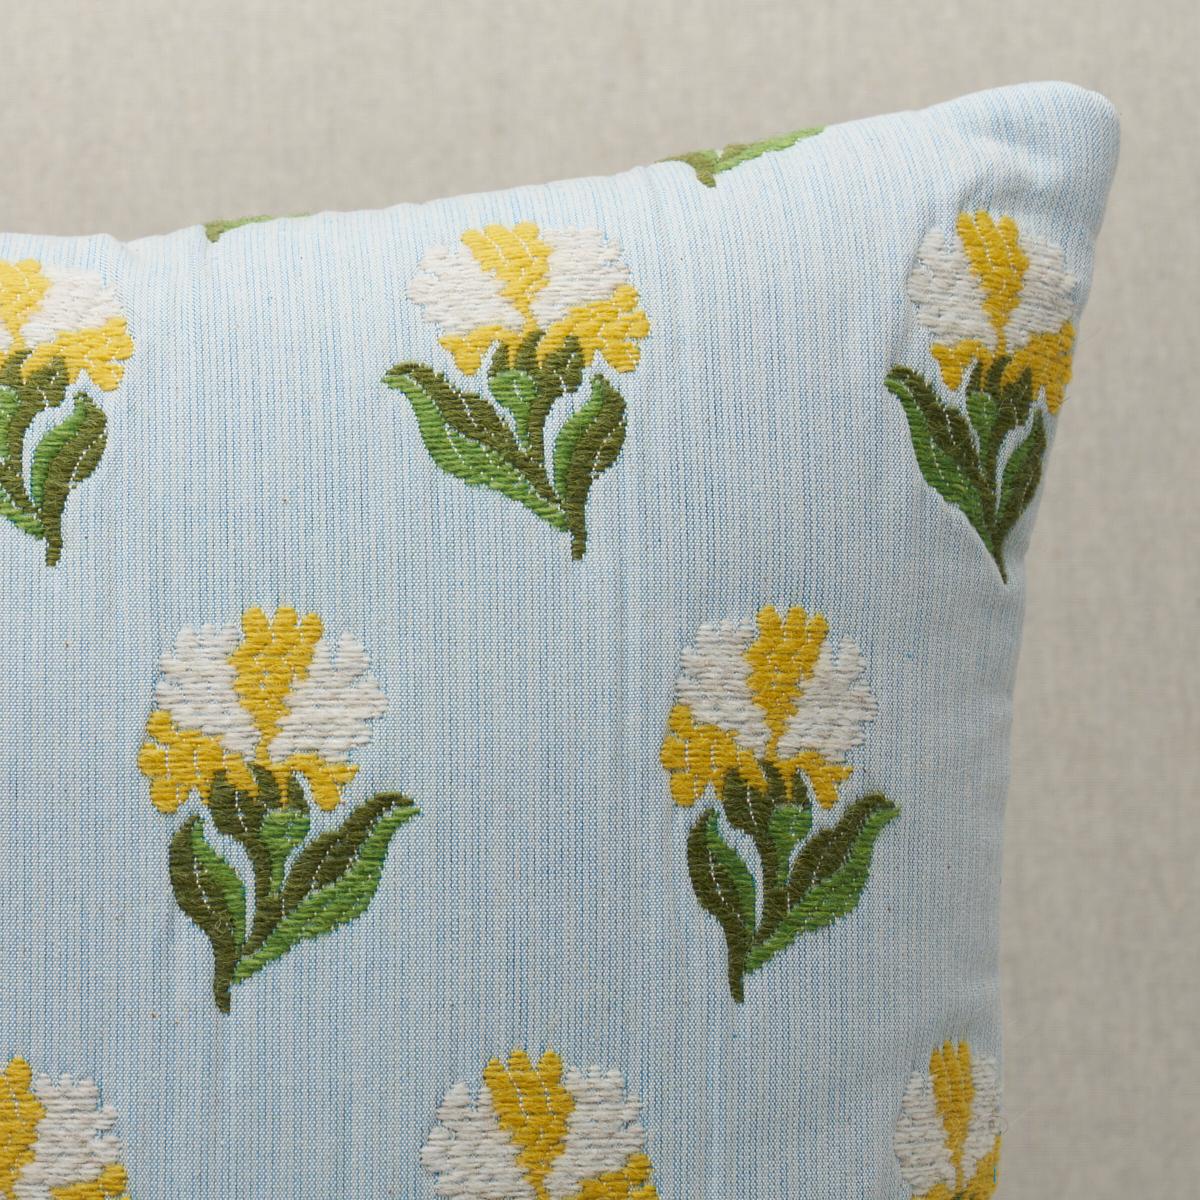 This pillow features Rosina Floral with a knife edge finish. Featuring a unique woven rosebud pattern, Rosina Floral in cornflower is an appealing dimensional design with an embroidered look. Pillow includes a feather/down fill insert and hidden